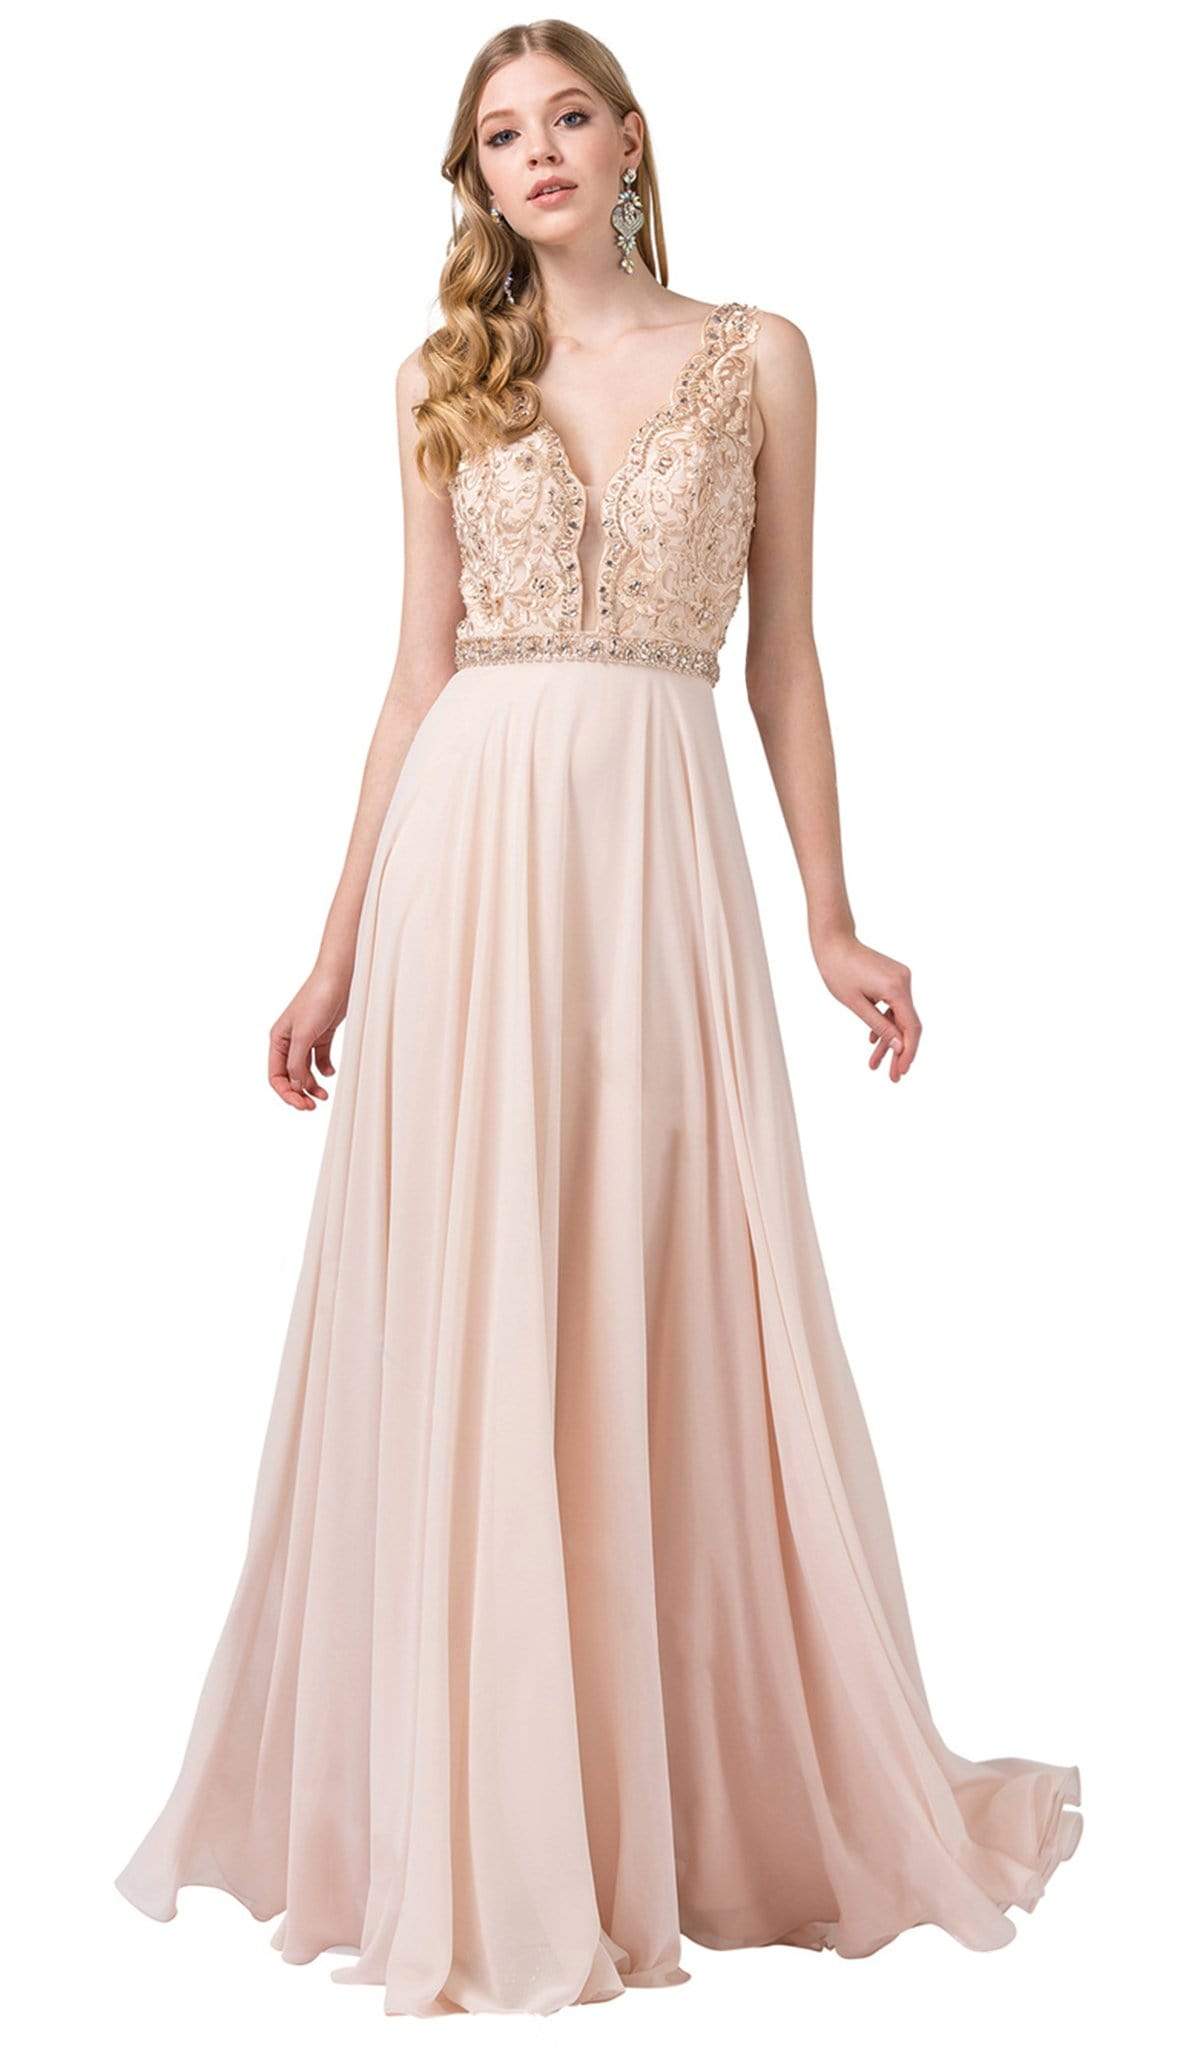 Dancing Queen - 2552 Scallop-Trimmed Plunging V-Neck A-Line Gown
